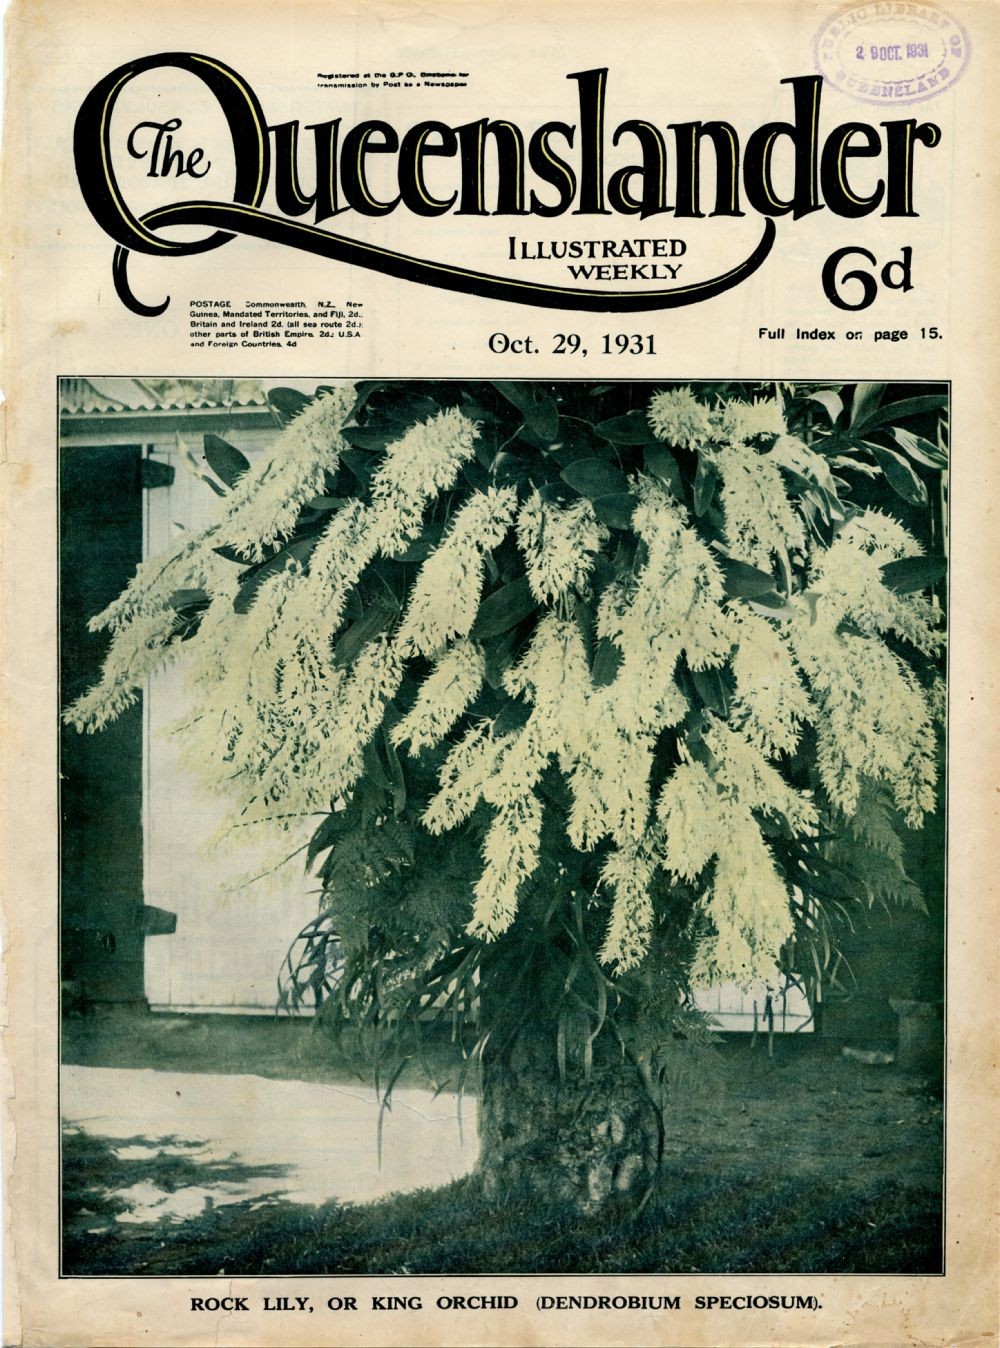 Illustrated front cover from The Queenslander October 29 1931